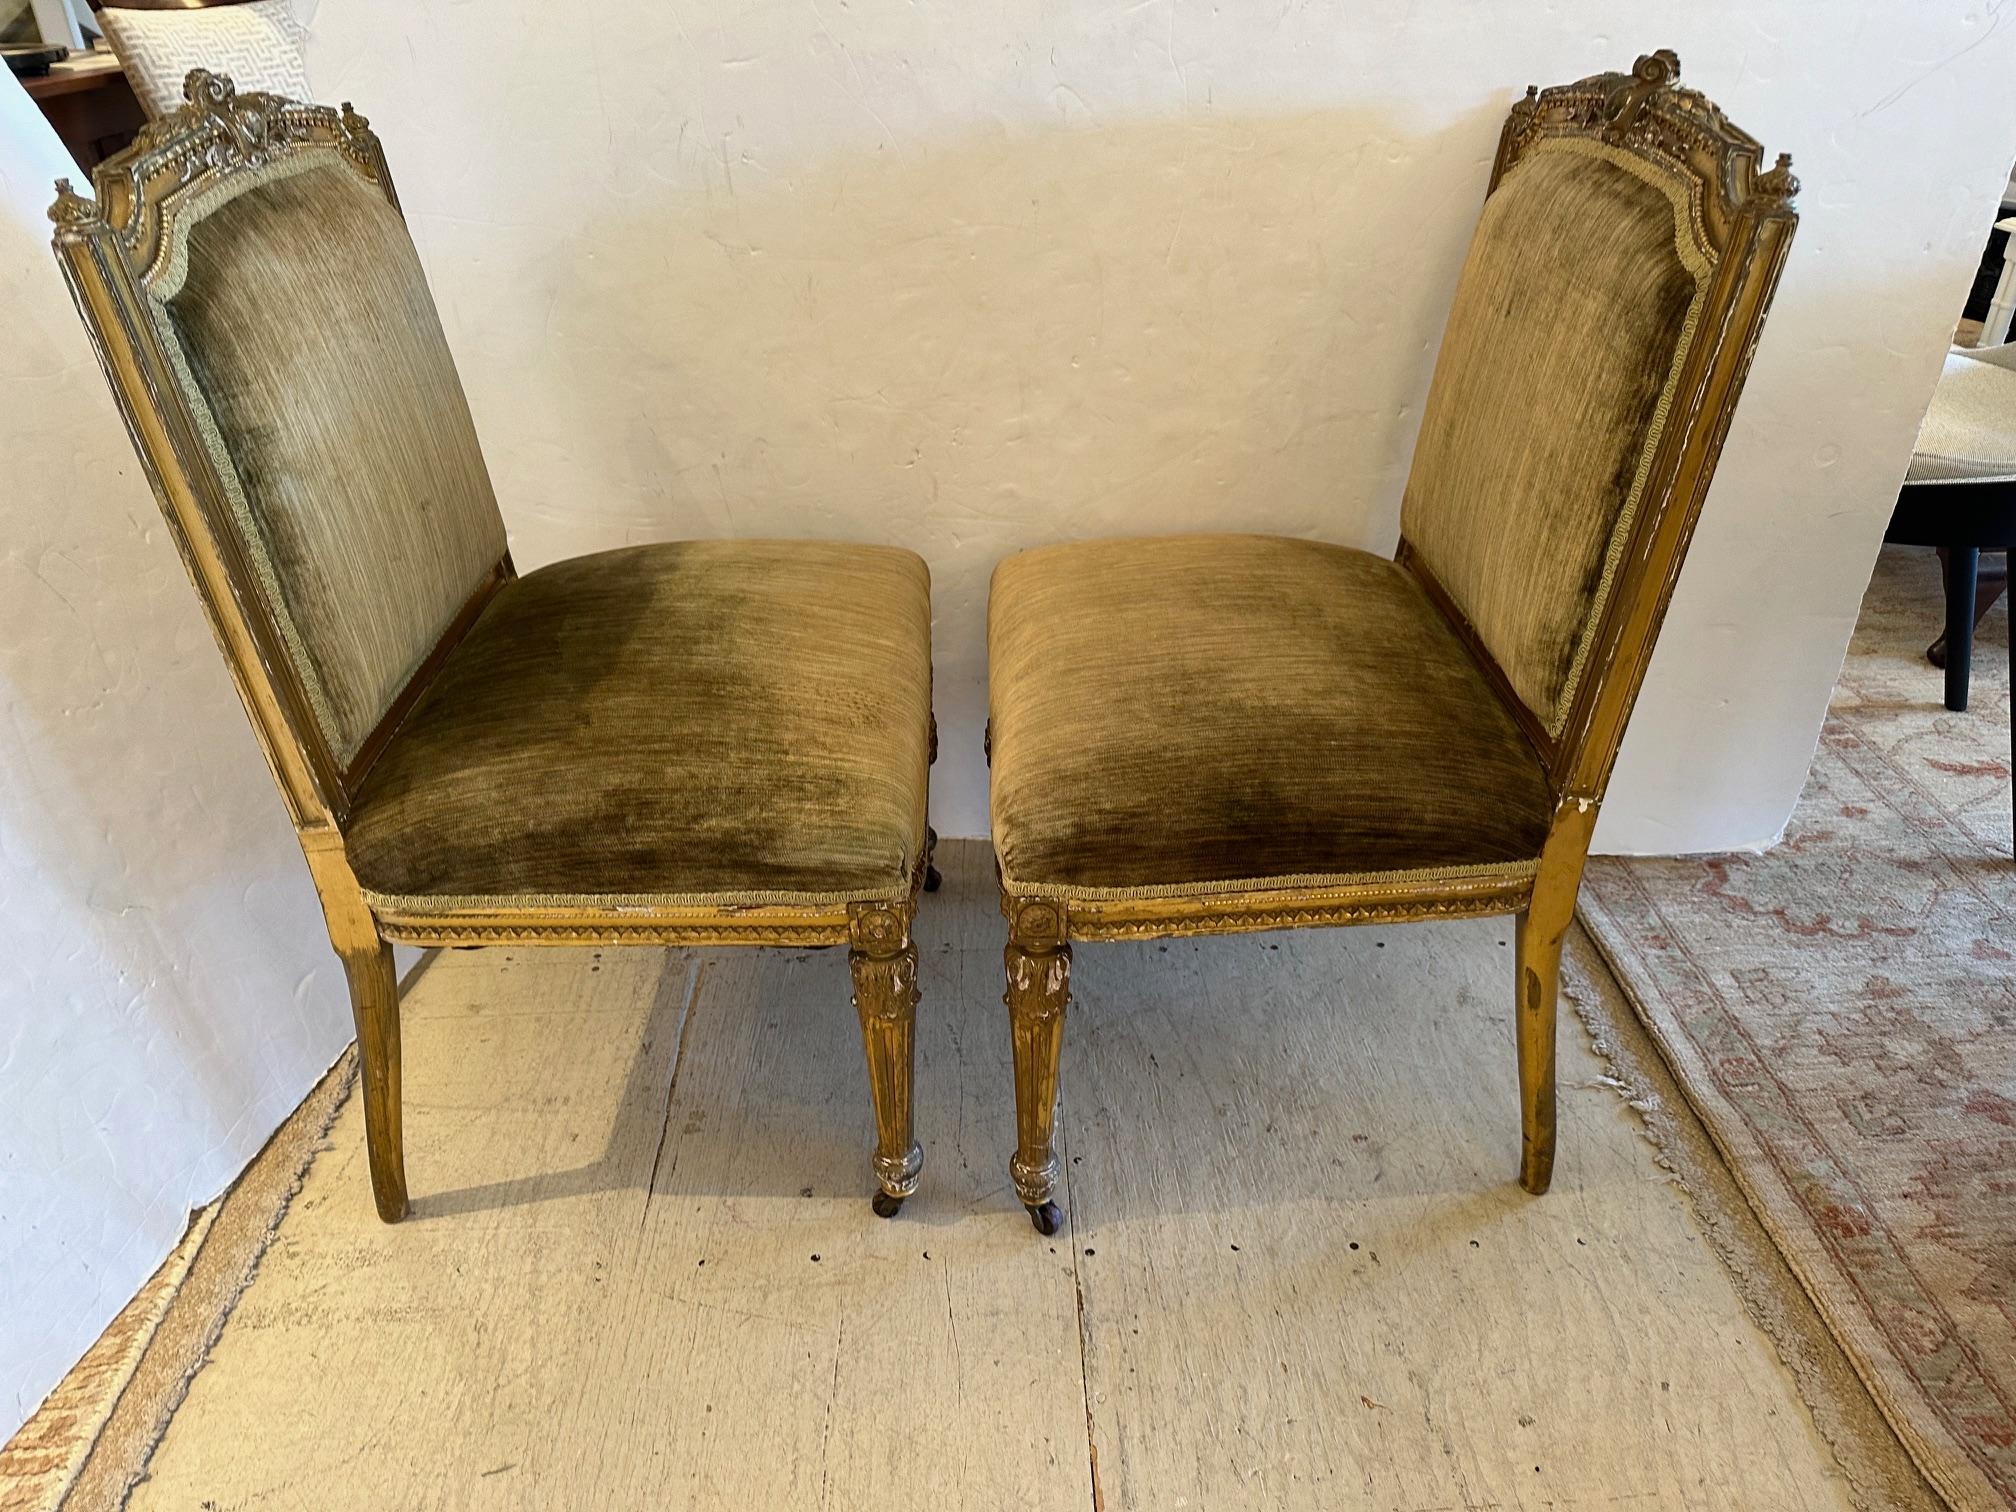 Lovely pair of petite French side chairs having beautifully aged giltwood frames and sumptuous grey velvet upholstery.
Casters on tapered legs. (one wheel missing)
Came for the contents of a Washington DC Embassy